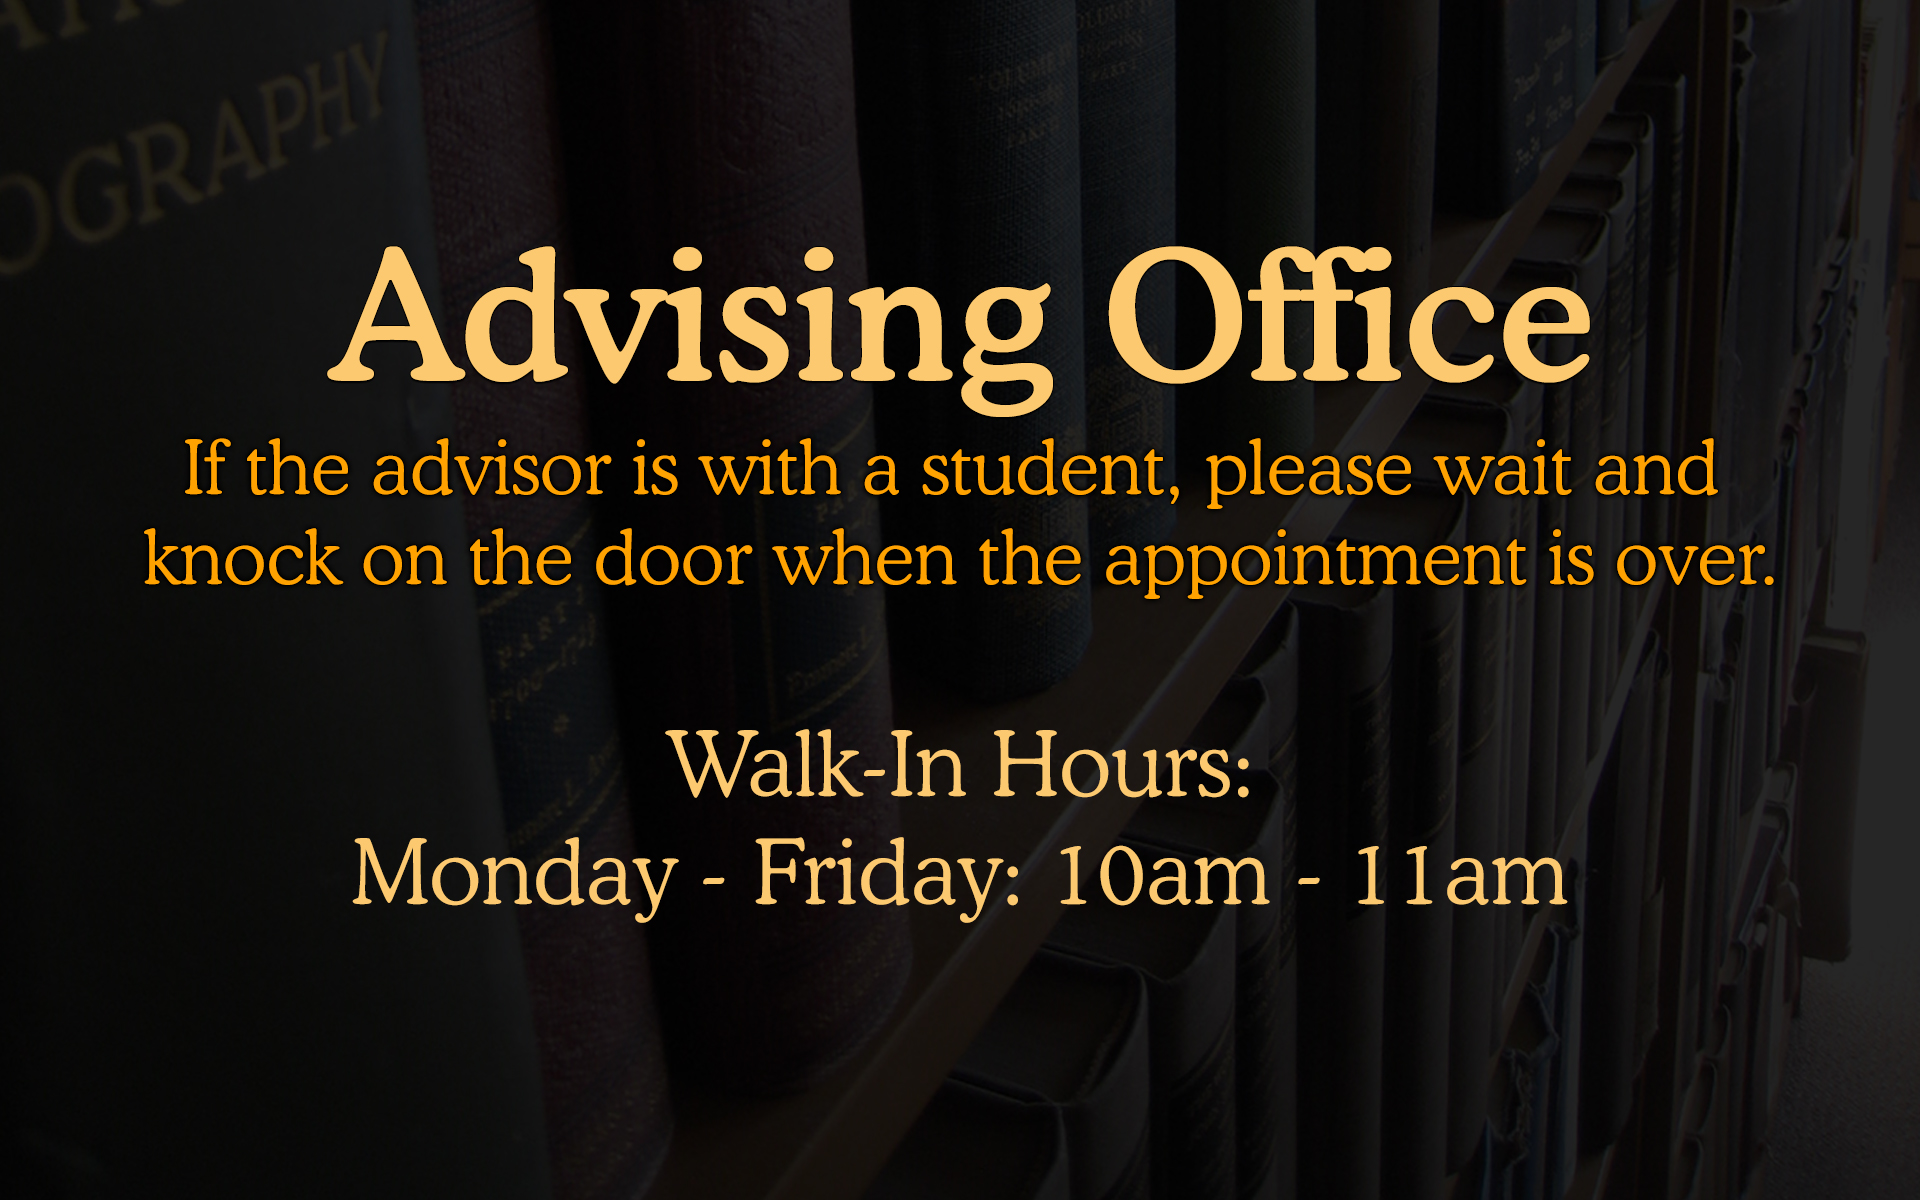 Advising Office. If the advisor is with a student, please wait and knock on the door when the appointment is over. Walk-In Hours: Monday - Friday: 10am - 11am